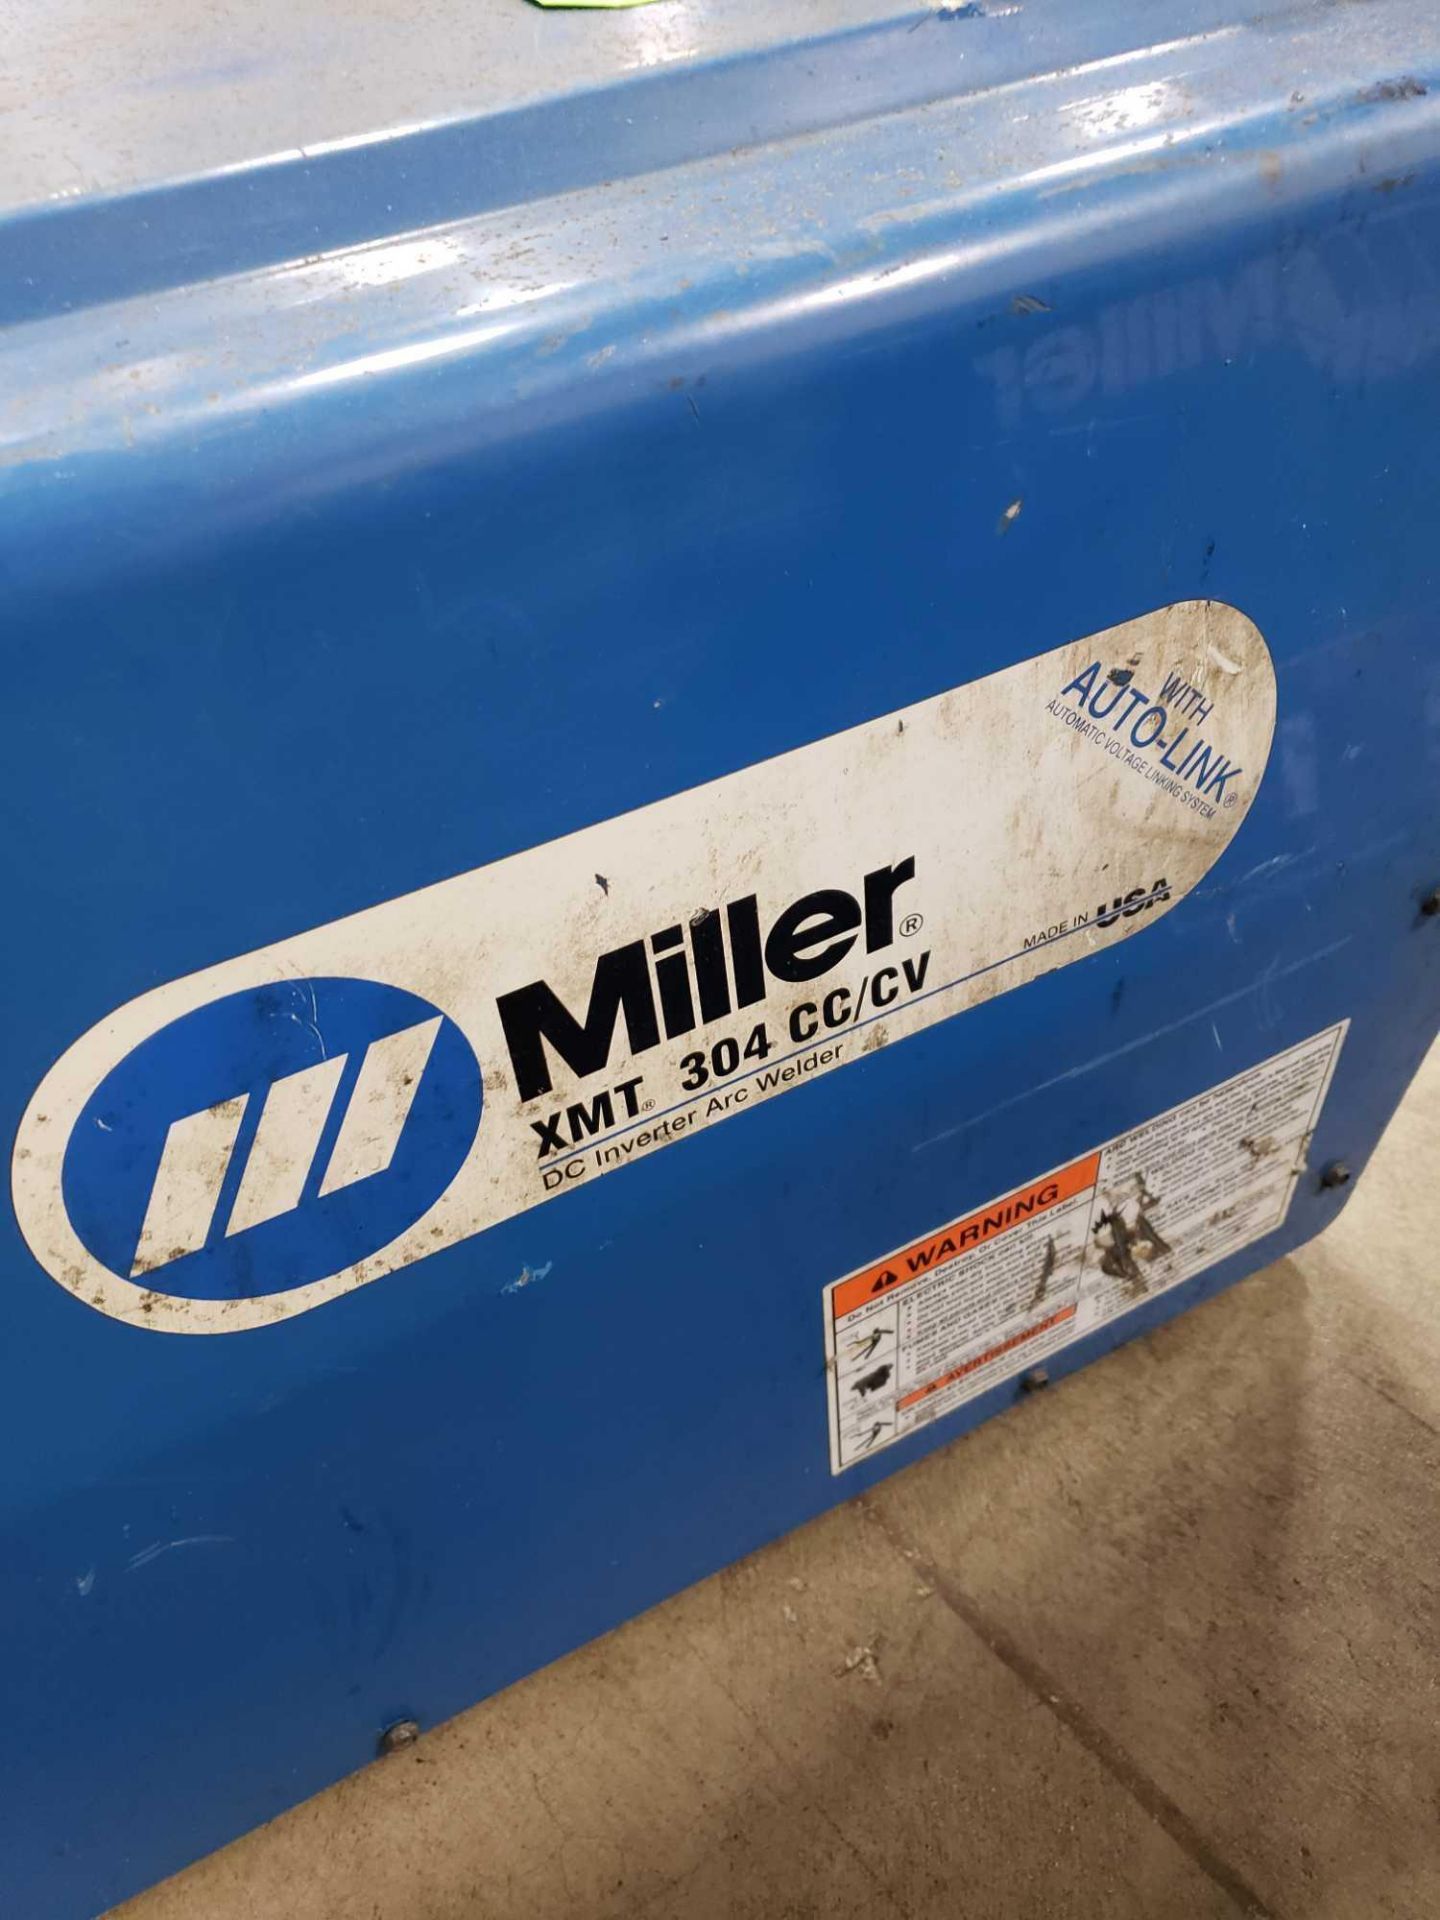 Miller XMT304 CC/CV welding power supply 230/460v, single and 3-phase. - Image 3 of 3